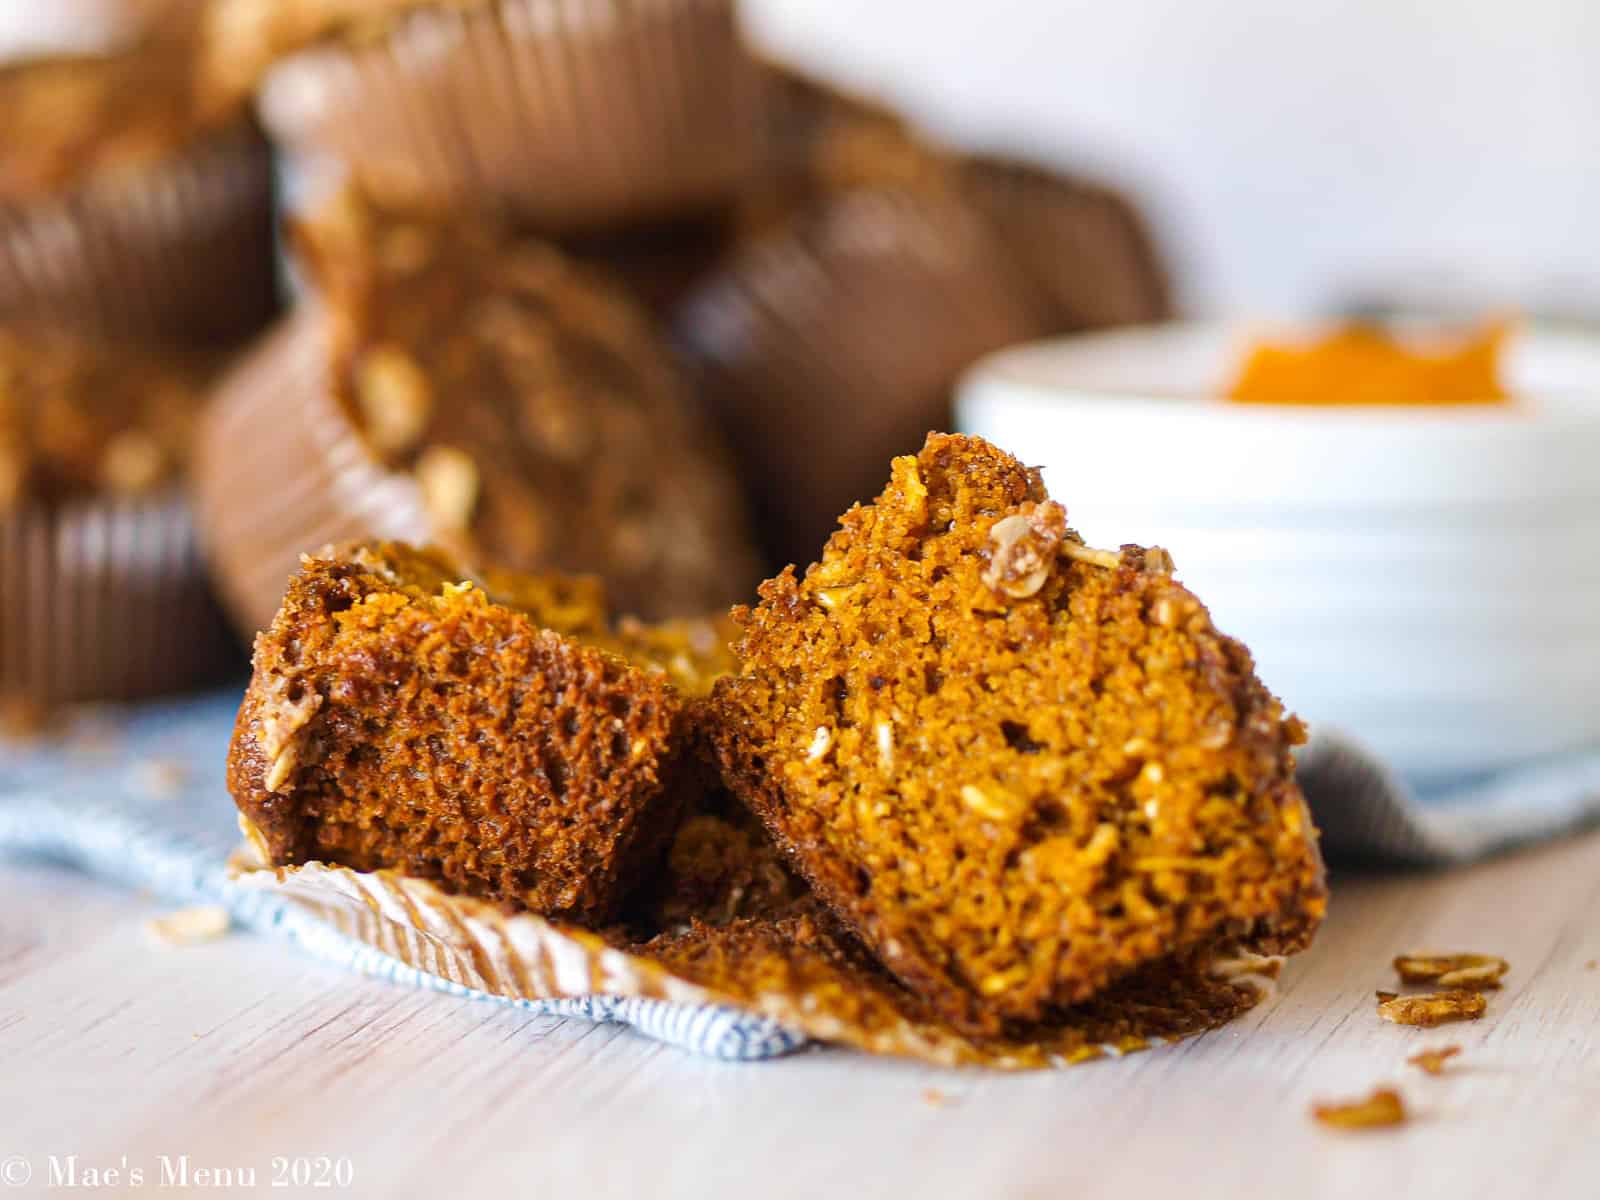 A split gluten-free pumpkin muffin in front of a stack of the muffins